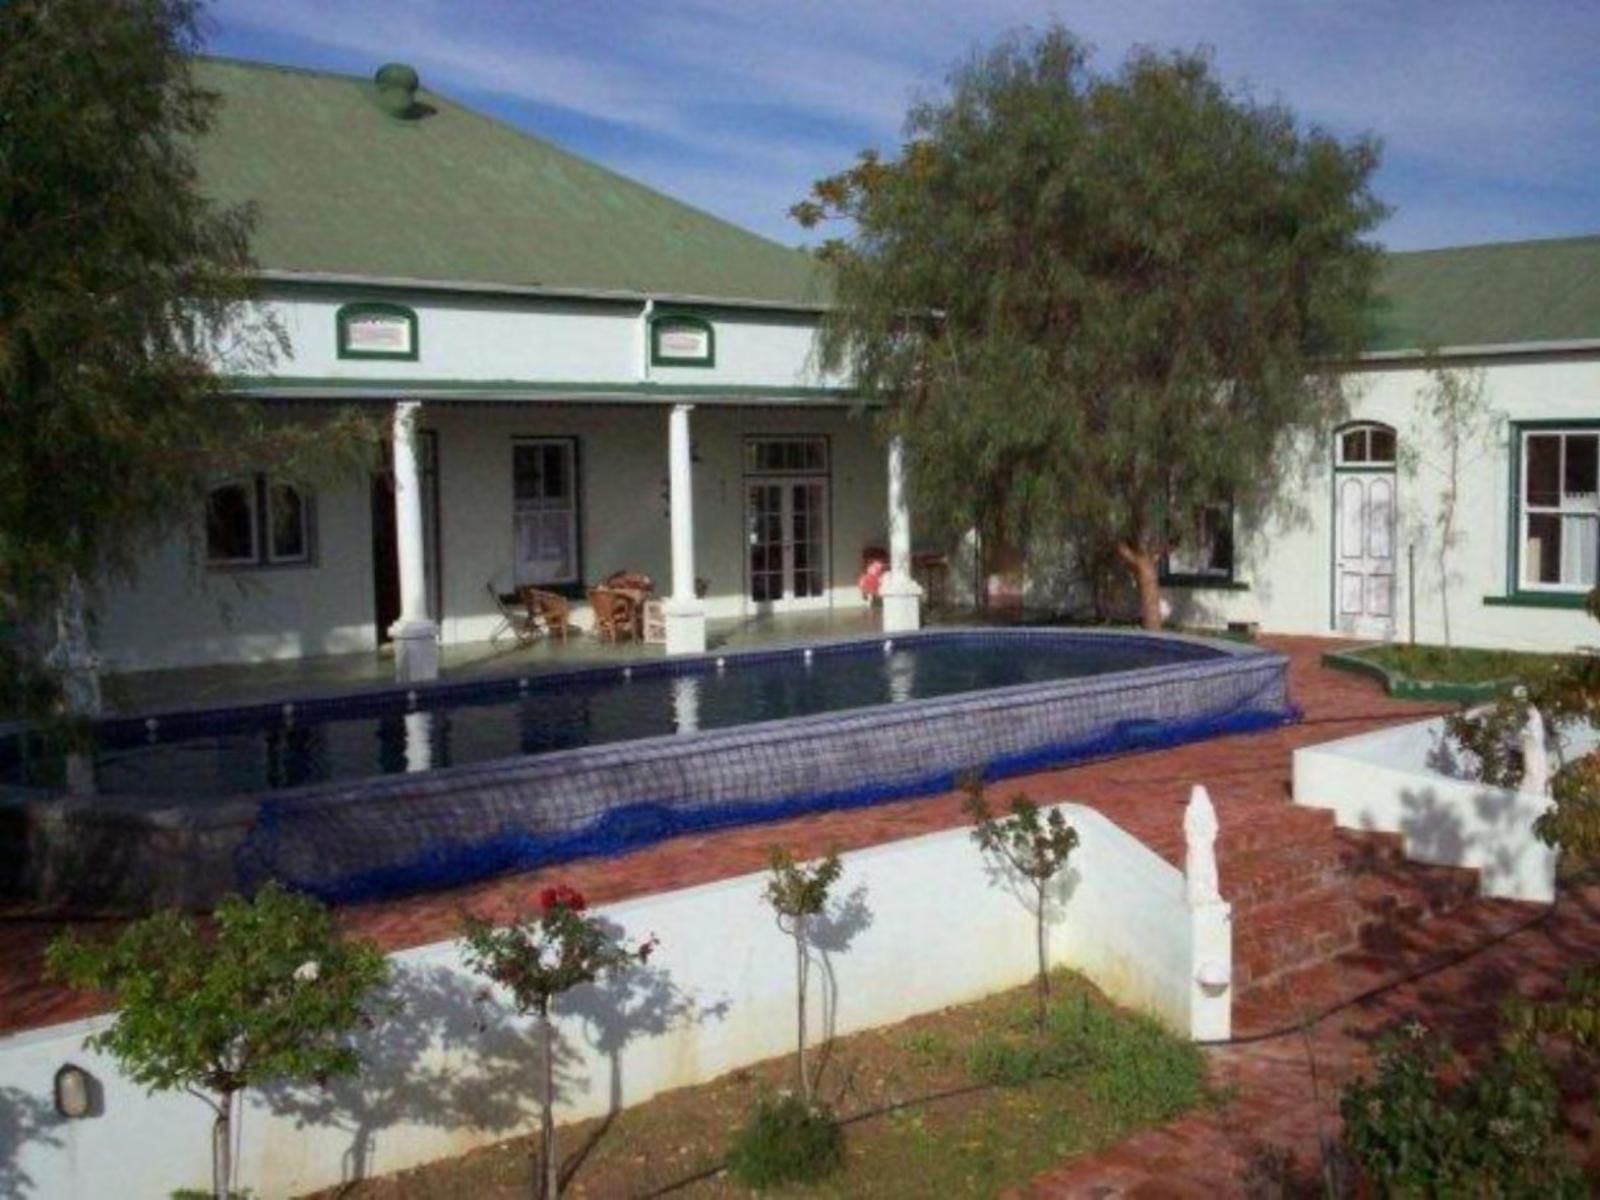 Moreson Manor Riebeek Kasteel Western Cape South Africa House, Building, Architecture, Swimming Pool